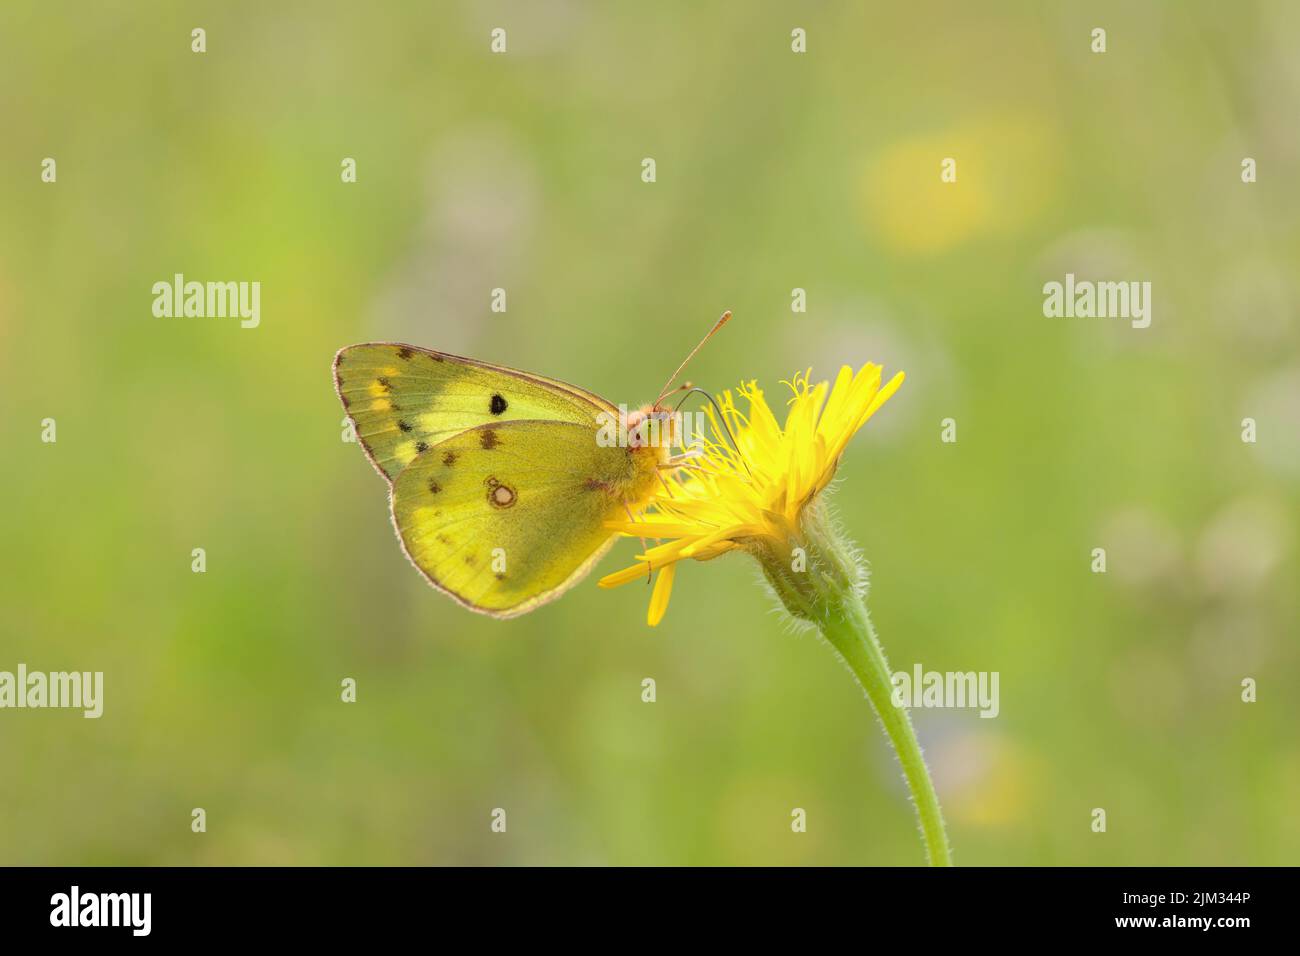 Clouded yellow butterfly (Colias hyale or Colias alfacariensis). The species could only be differed from the caterpillars. Stock Photo